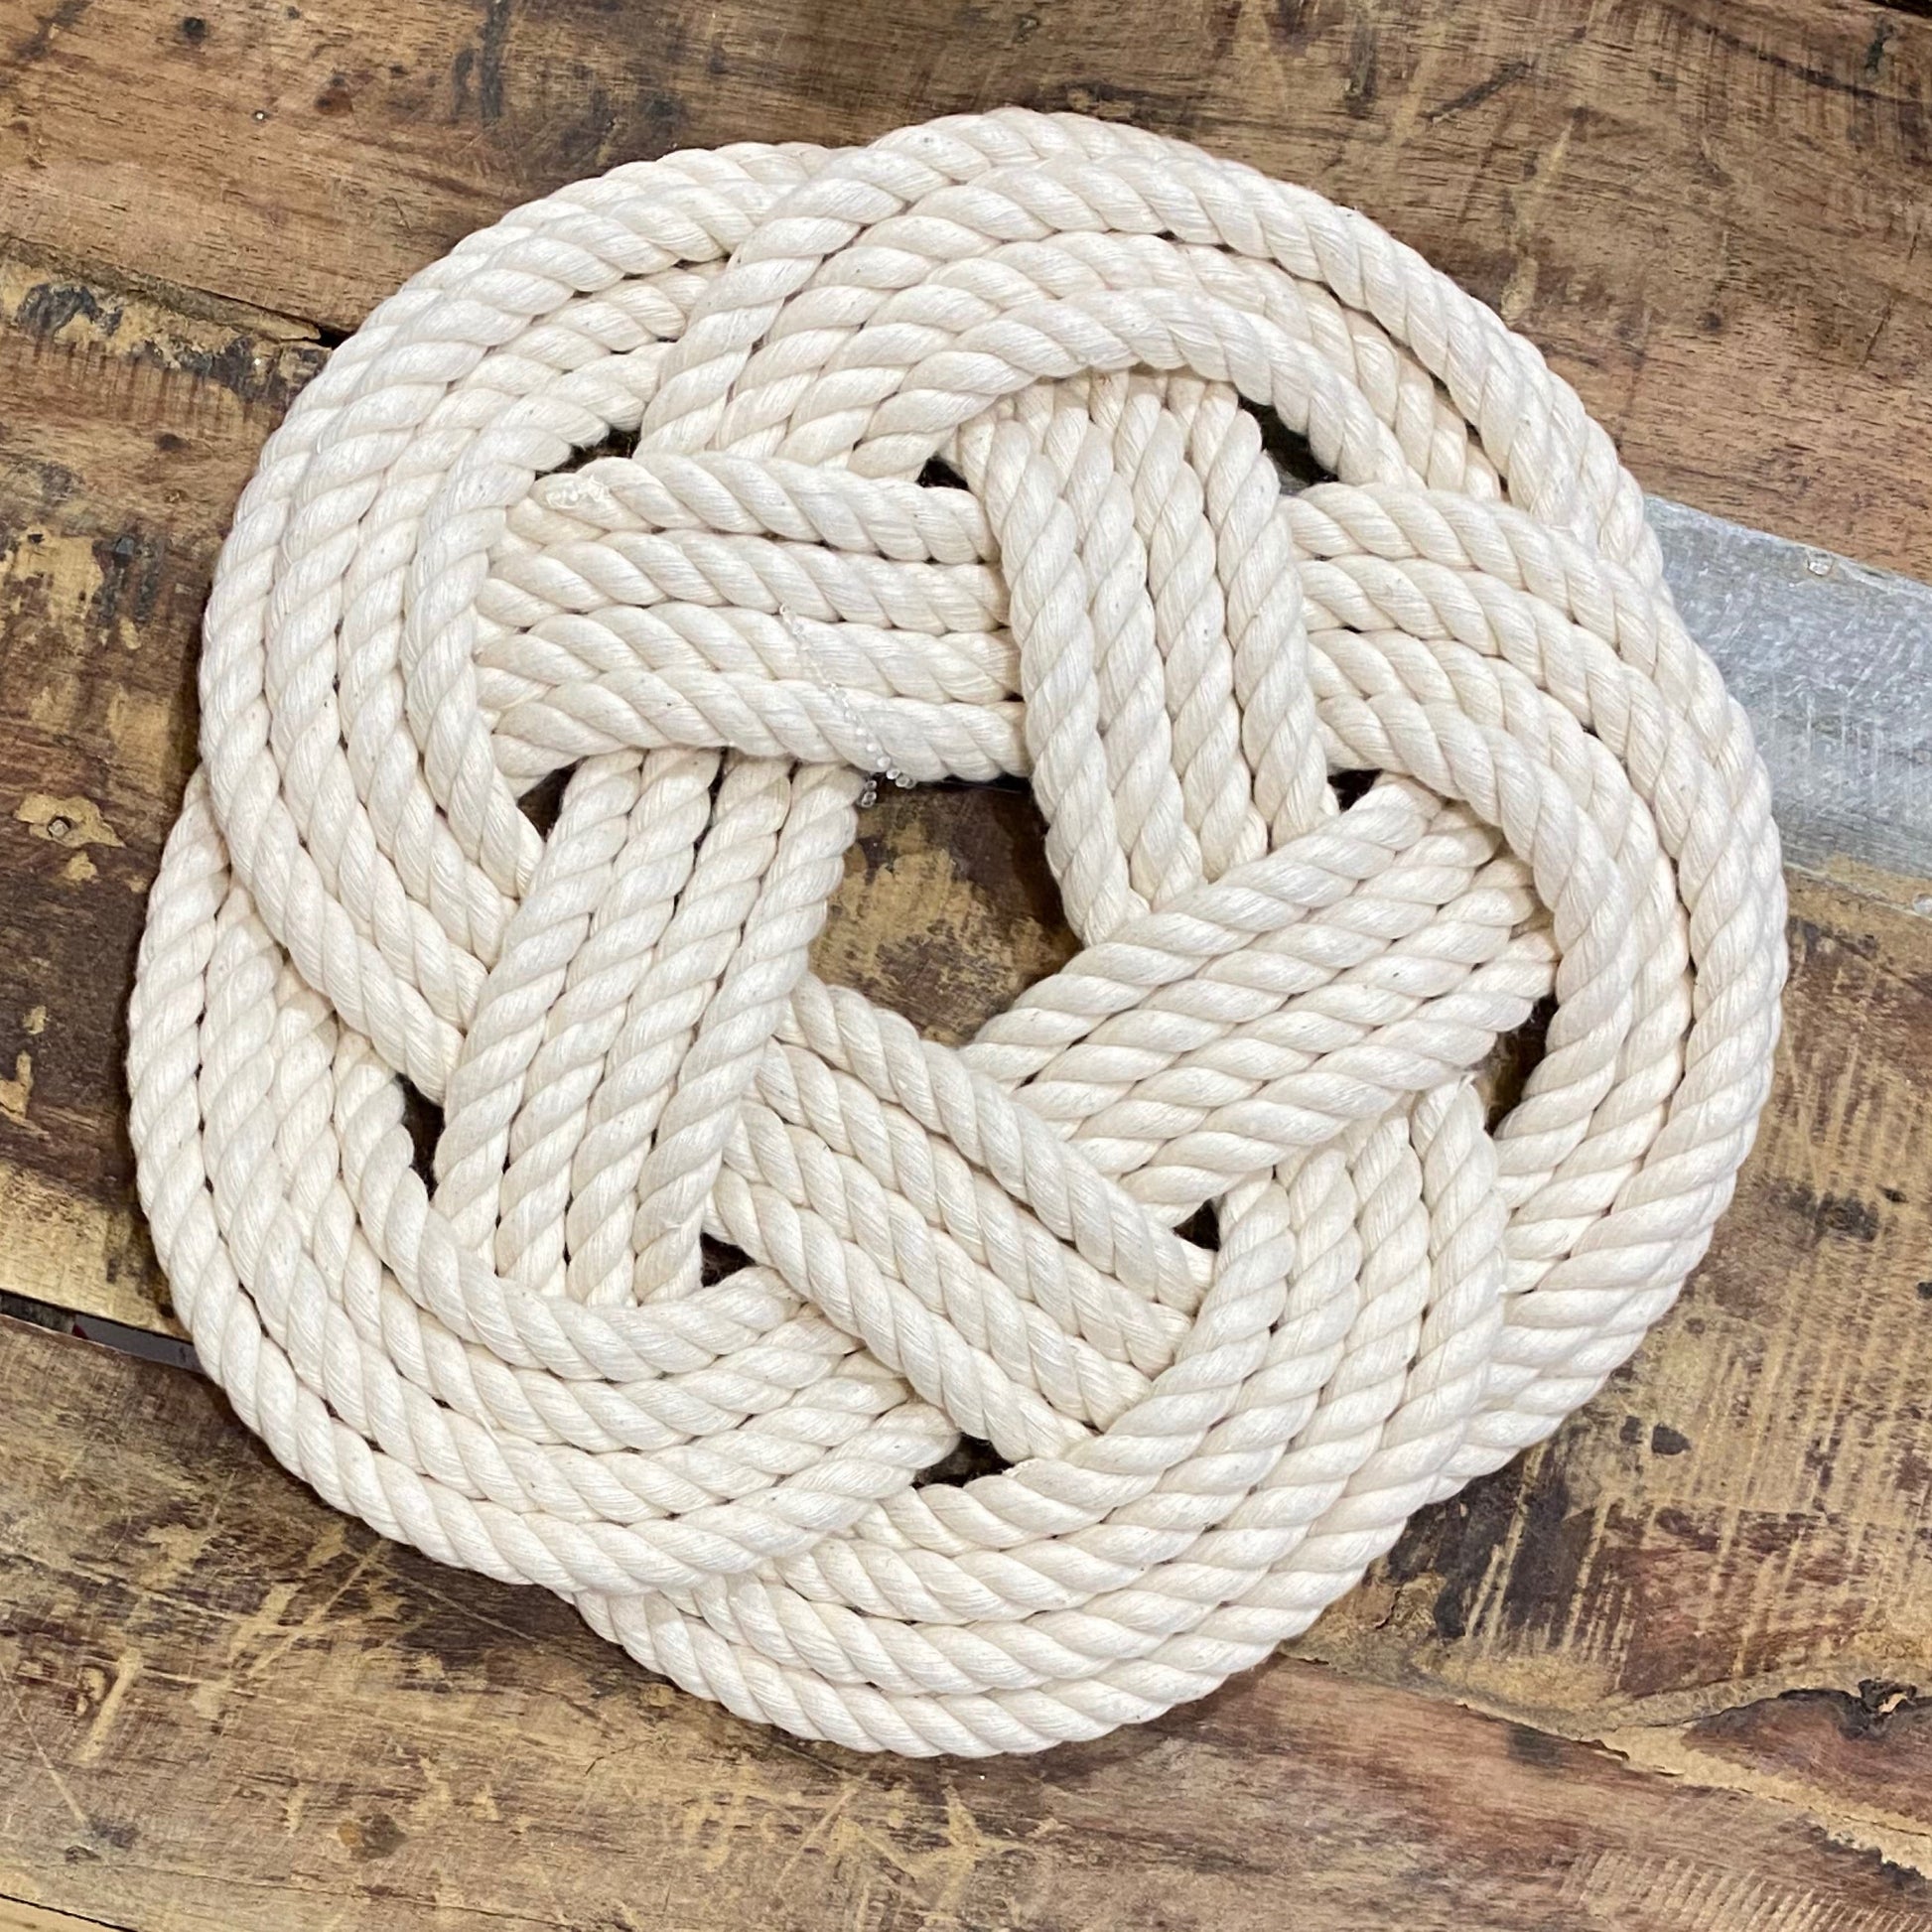 Nautical Sailor Knot Woven Rope Round Cotton Trivet 7-in - White